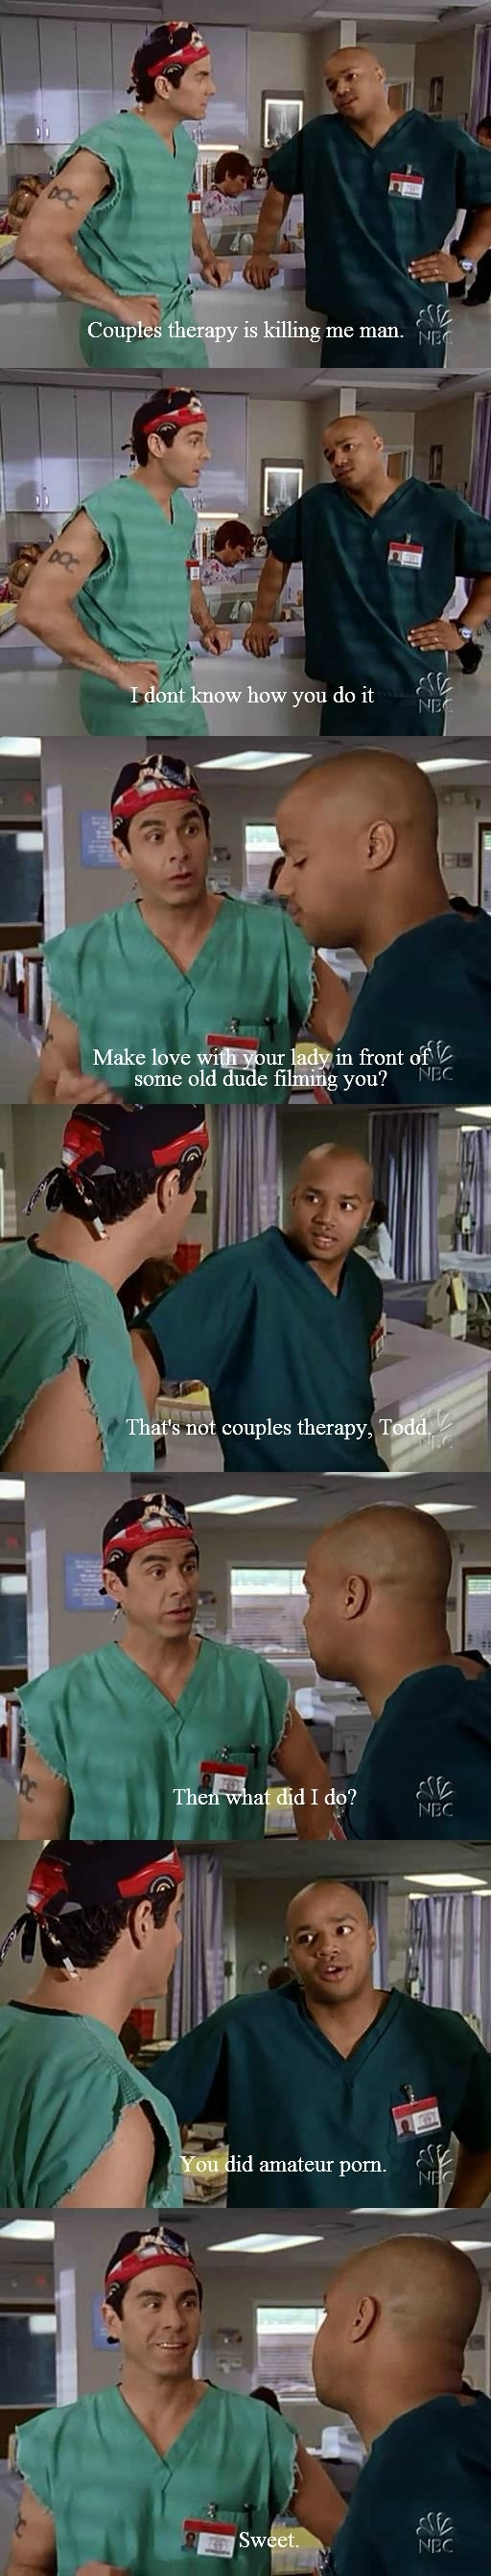 Here is some Scrubs to start out day with